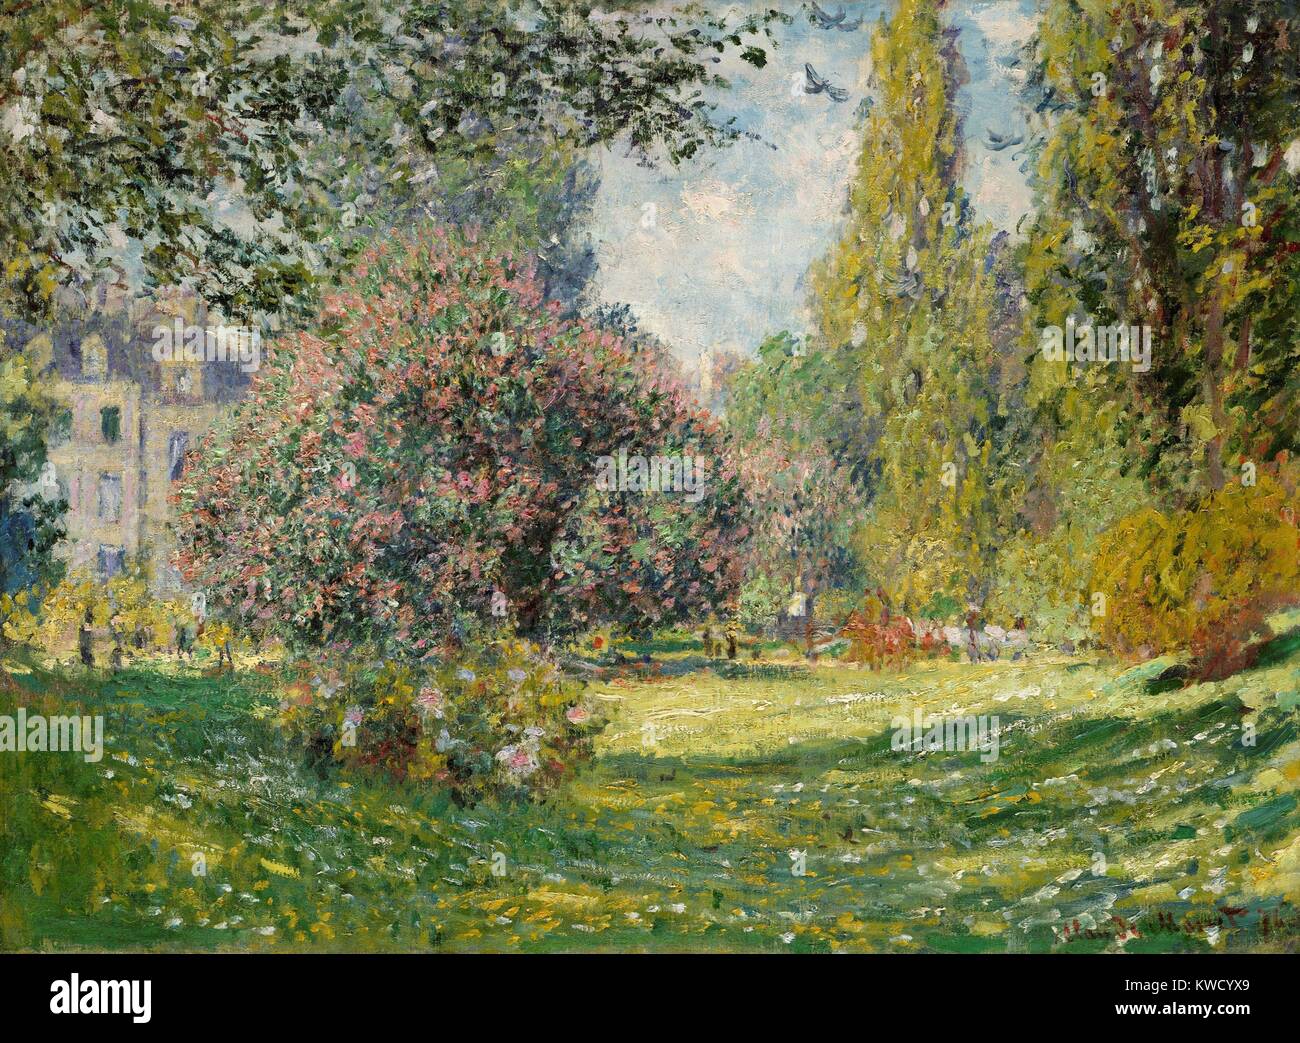 Landscape: The Parc Monceau, by Claude Monet, 1876, French impressionist painting, oil on canvas. Monet applied the paint in small daubs over the entire canvas, a style that became characteristic of his mature works (BSLOC 2017 3 26) Stock Photo